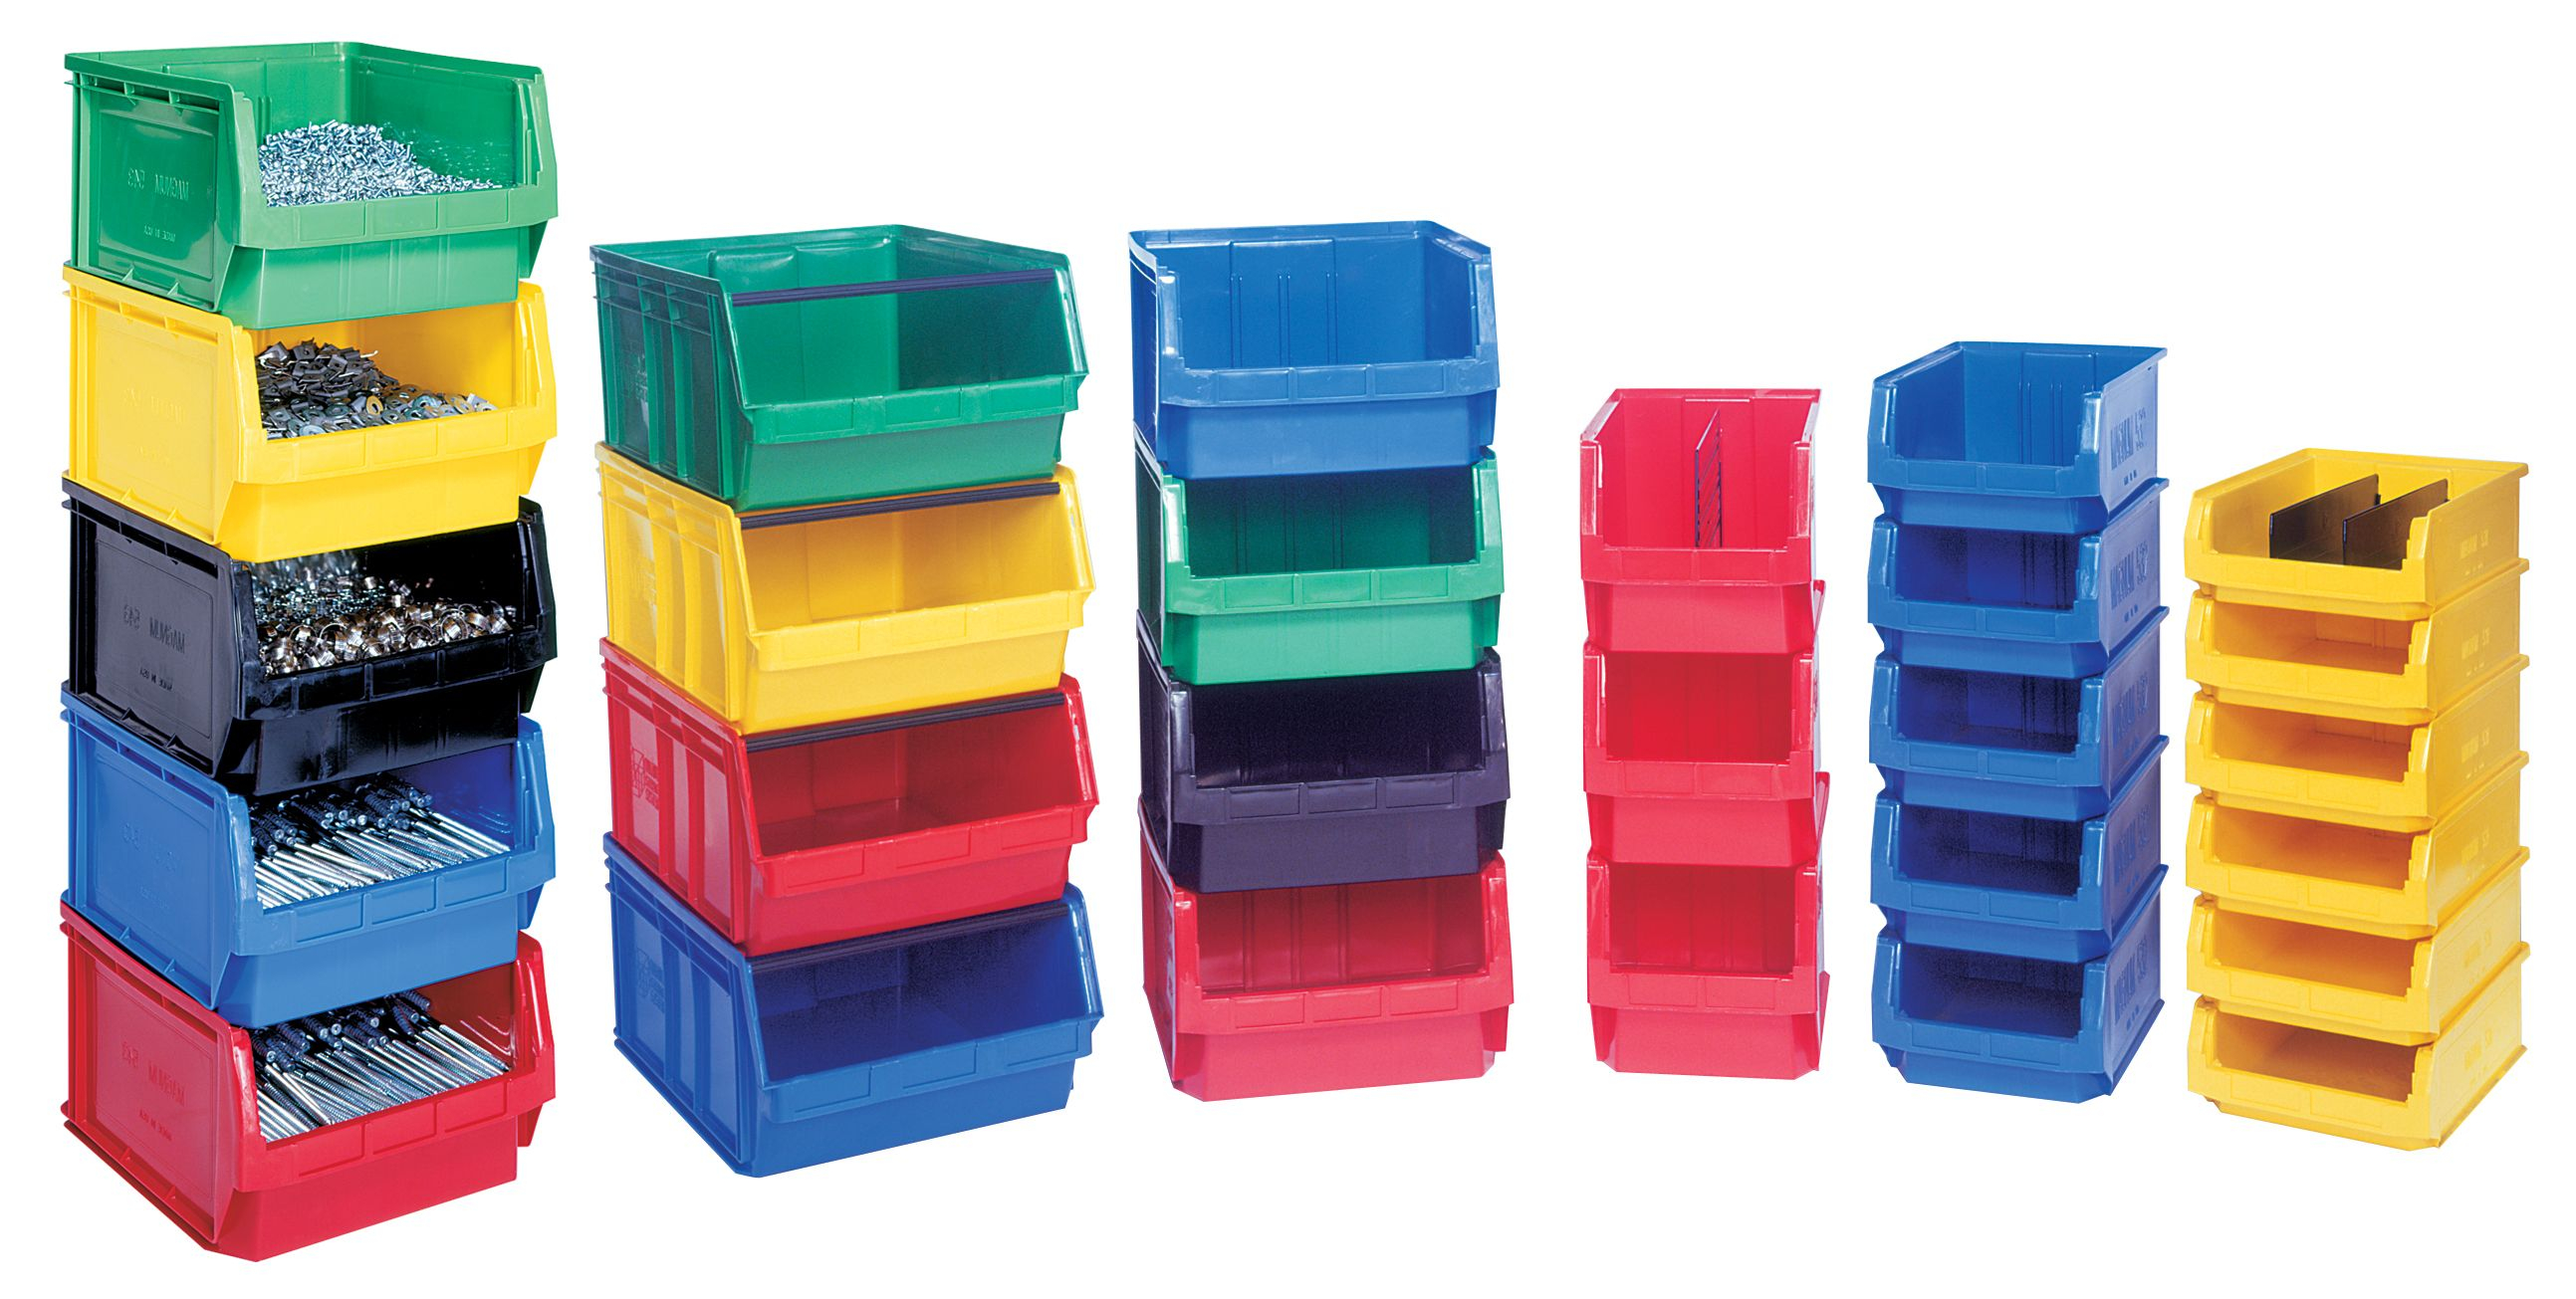 Stackable Plastic Storage Bins Useful For Modern Home Decoration intended for dimensions 2587 X 1305